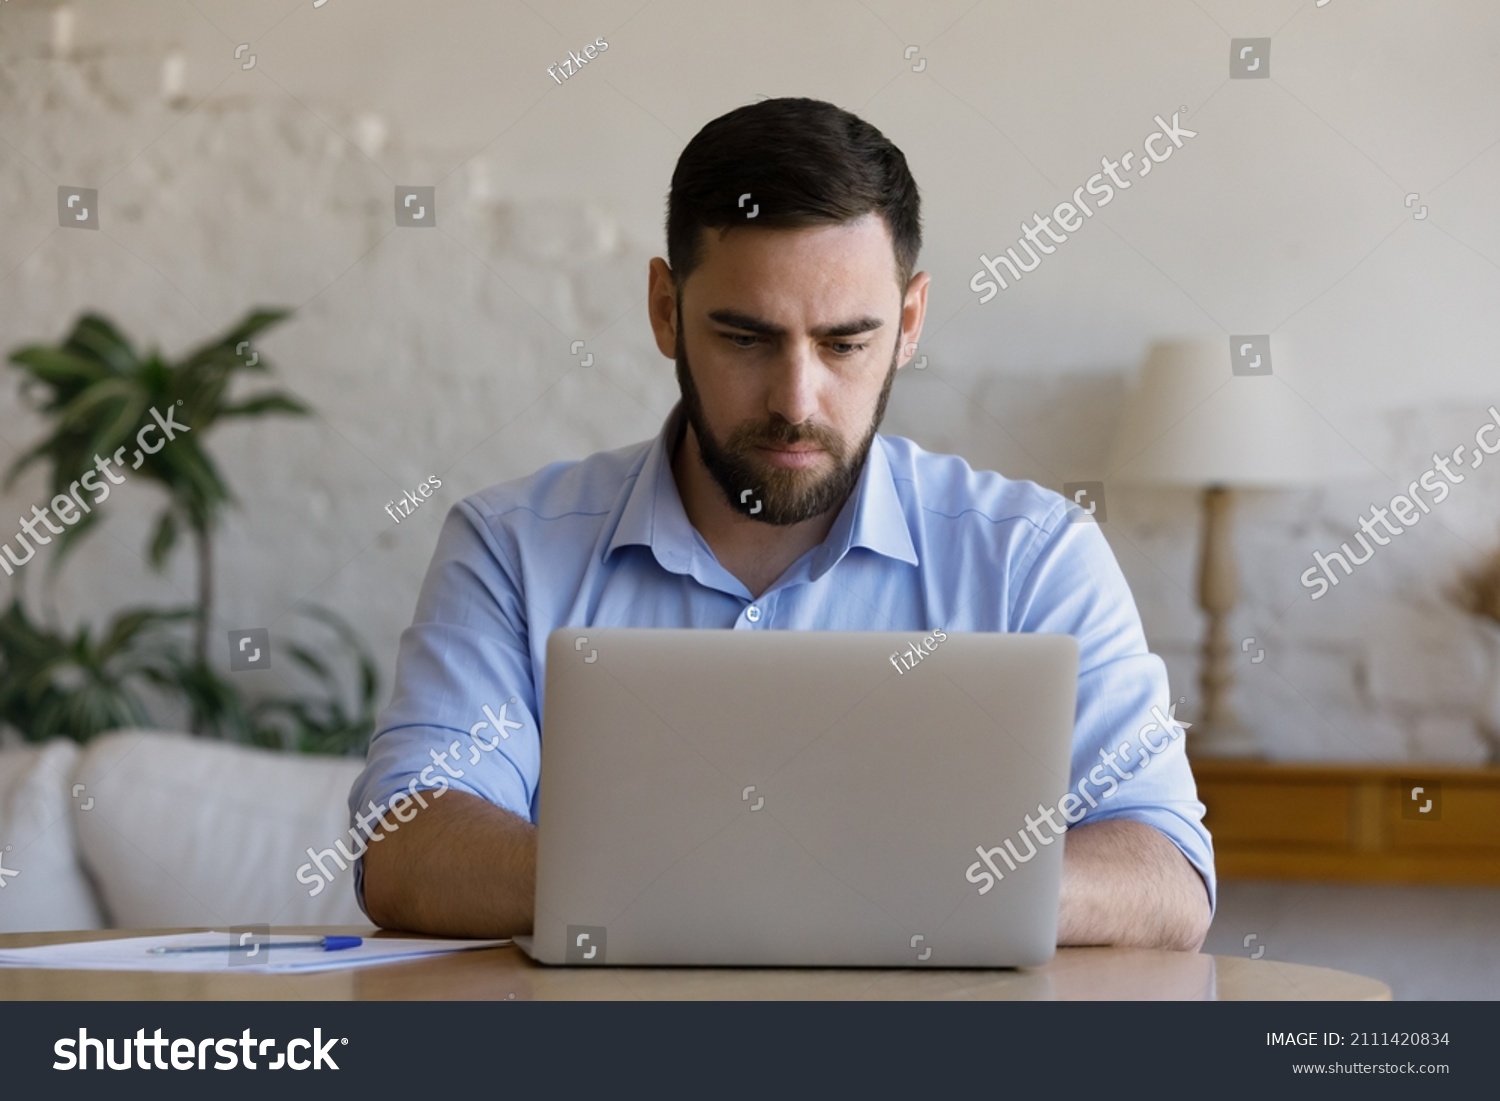 Focused millennial business man using laptop at table. Young entrepreneur, freelancer in casual, employee, worker using compute at home office workplace, typing, chatting online #2111420834